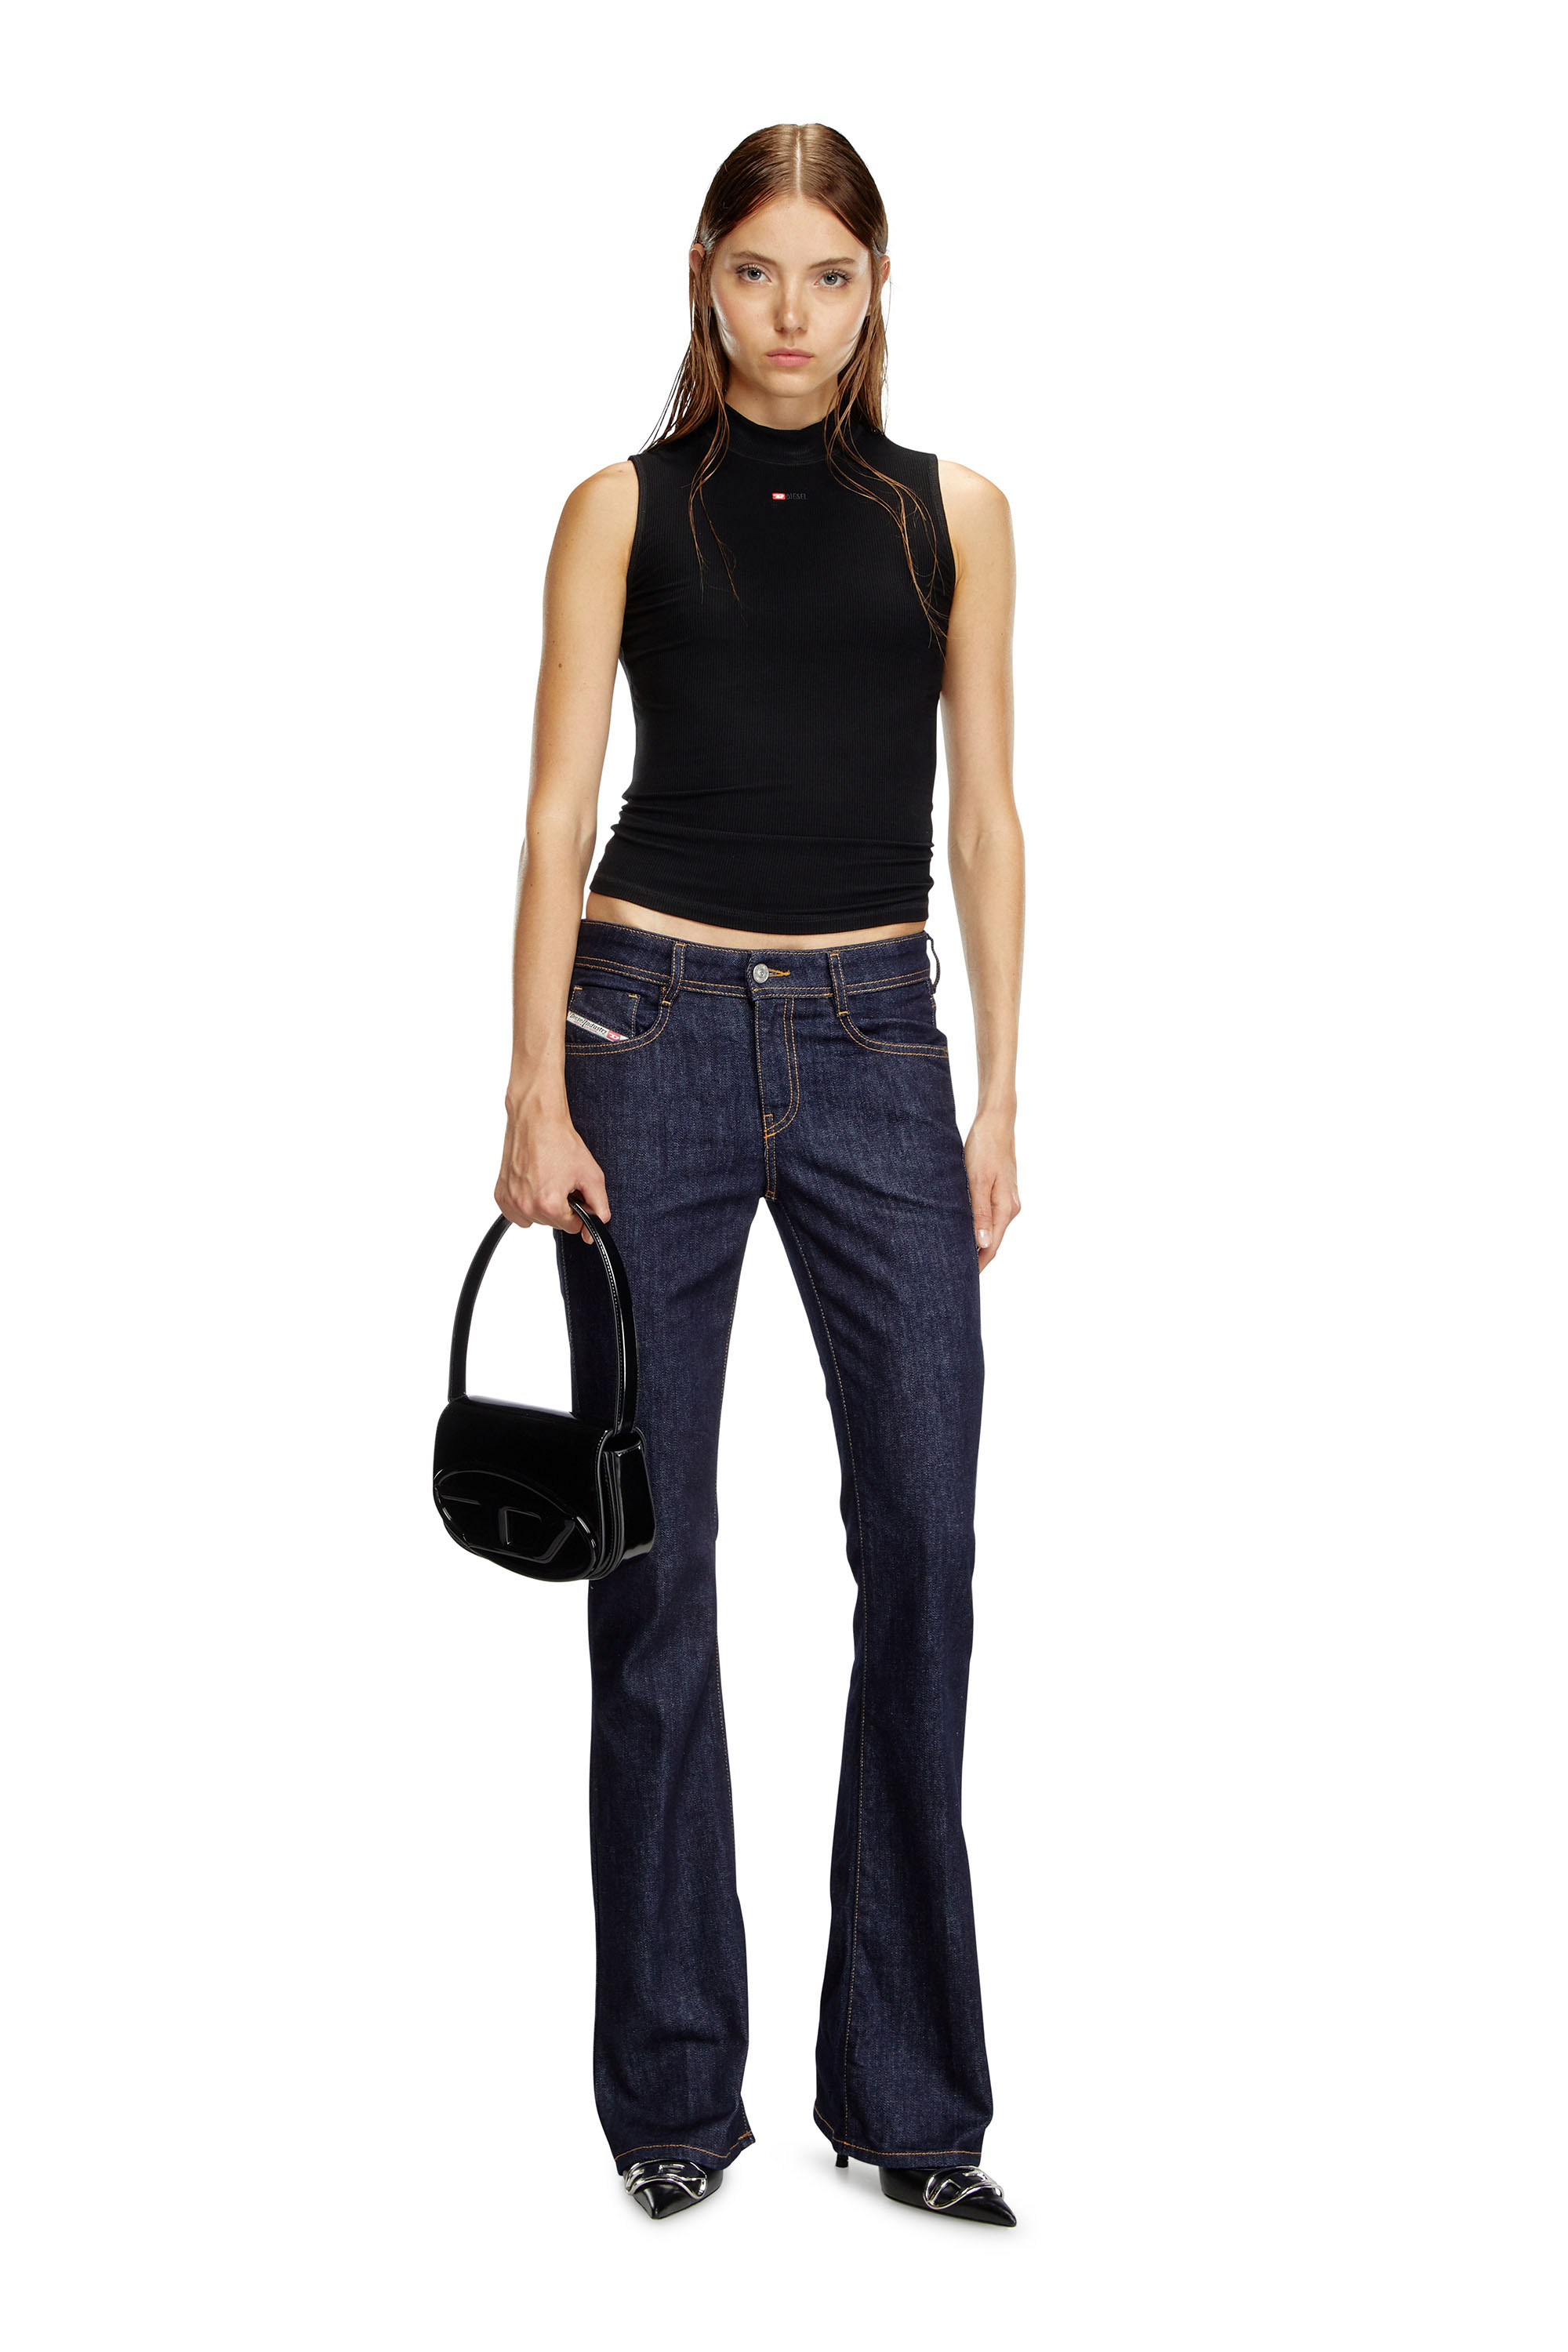 Diesel - Bootcut and Flare Jeans 1969 D-Ebbey Z9B89, Mujer Bootcut y Flare Jeans - 1969 D-Ebbey in Azul marino - Image 4